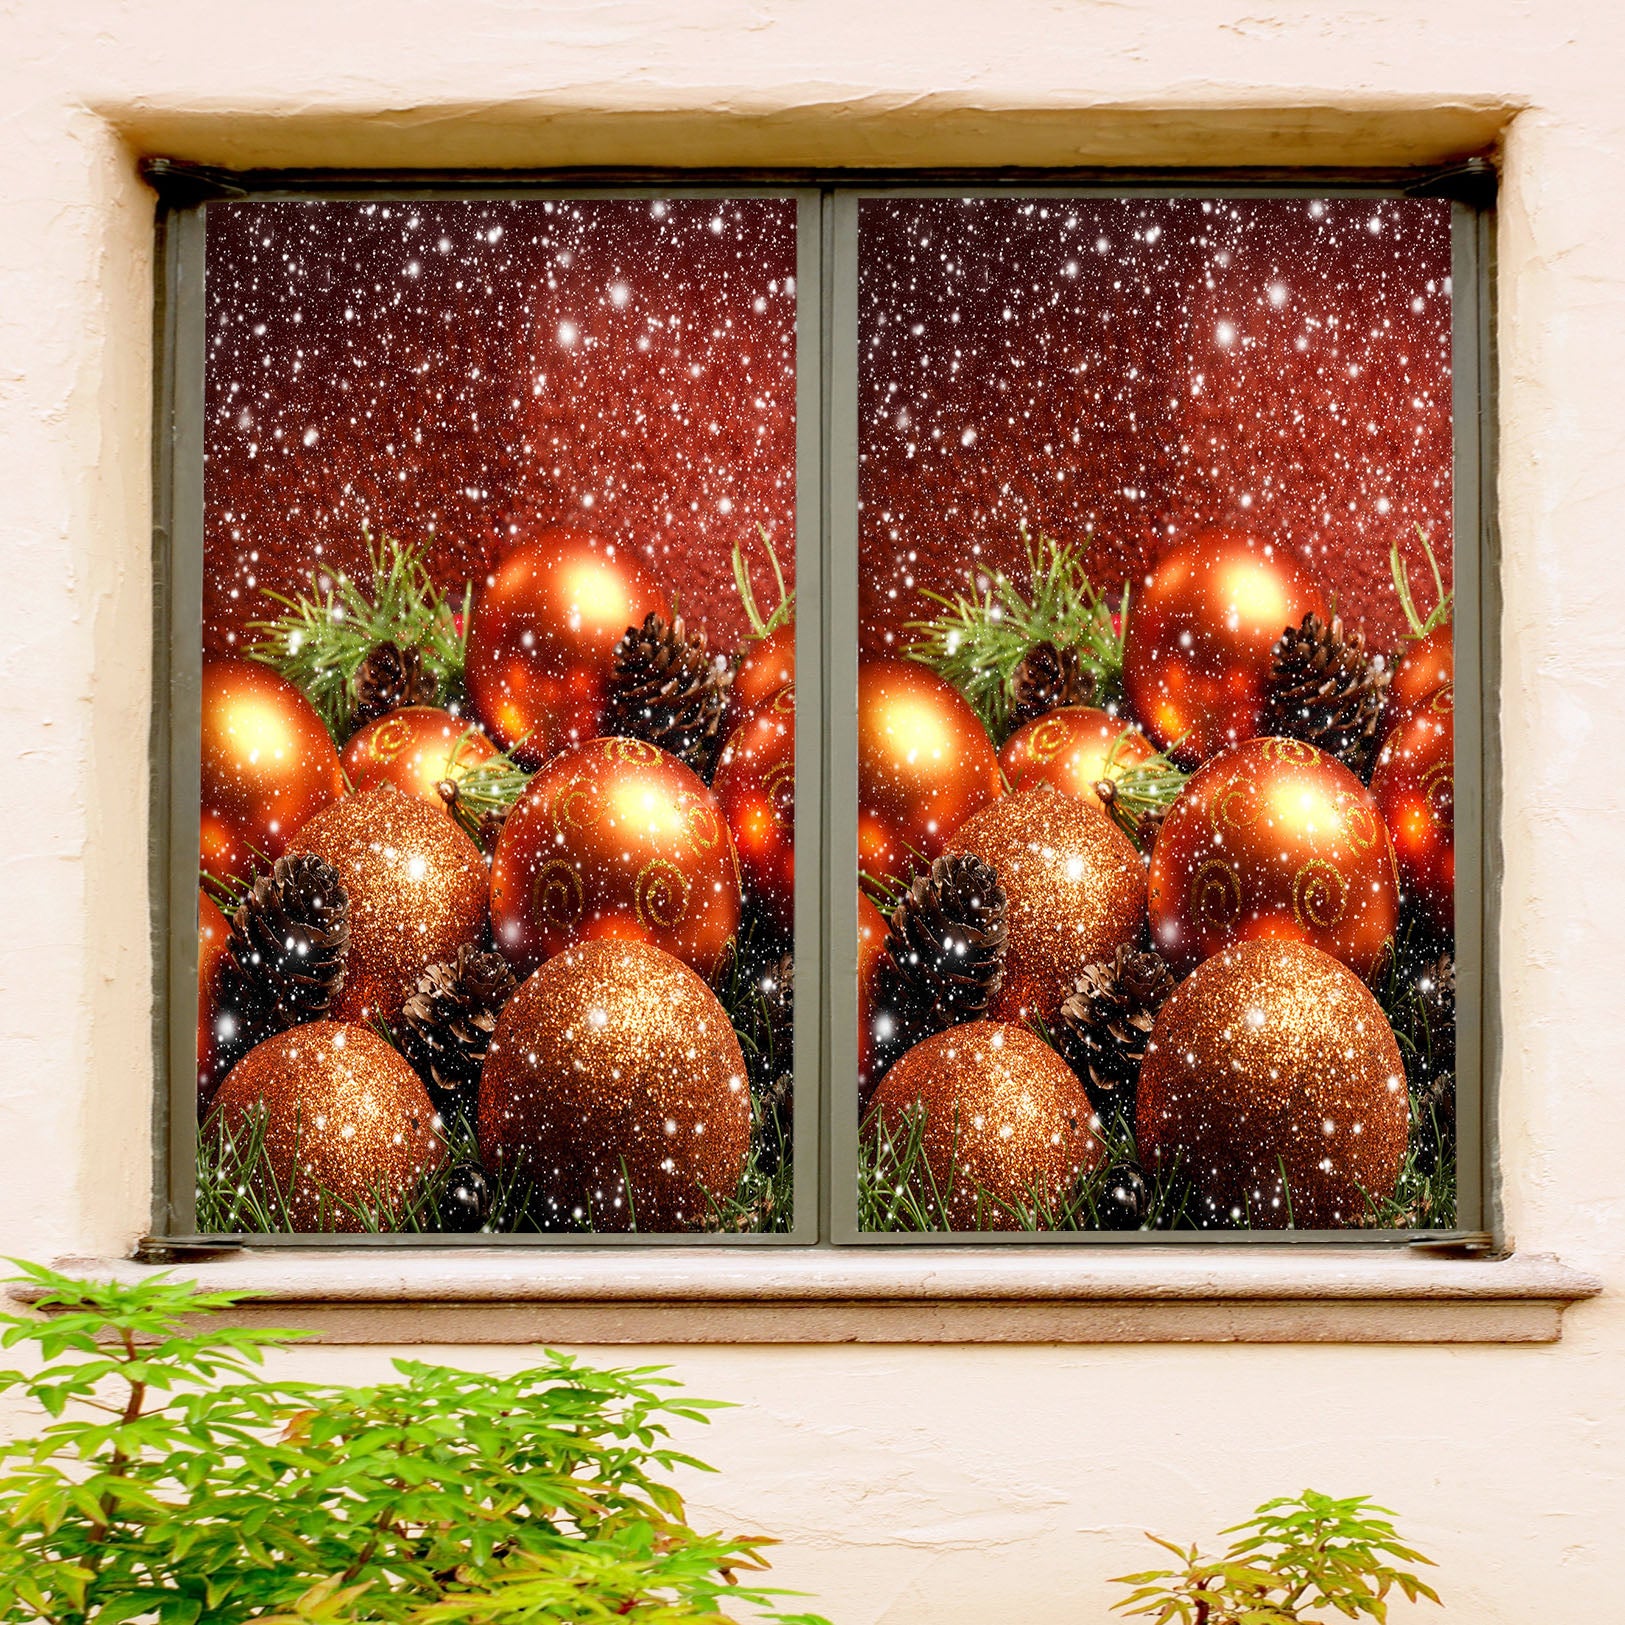 3D Golden Ball 43077 Christmas Window Film Print Sticker Cling Stained Glass Xmas